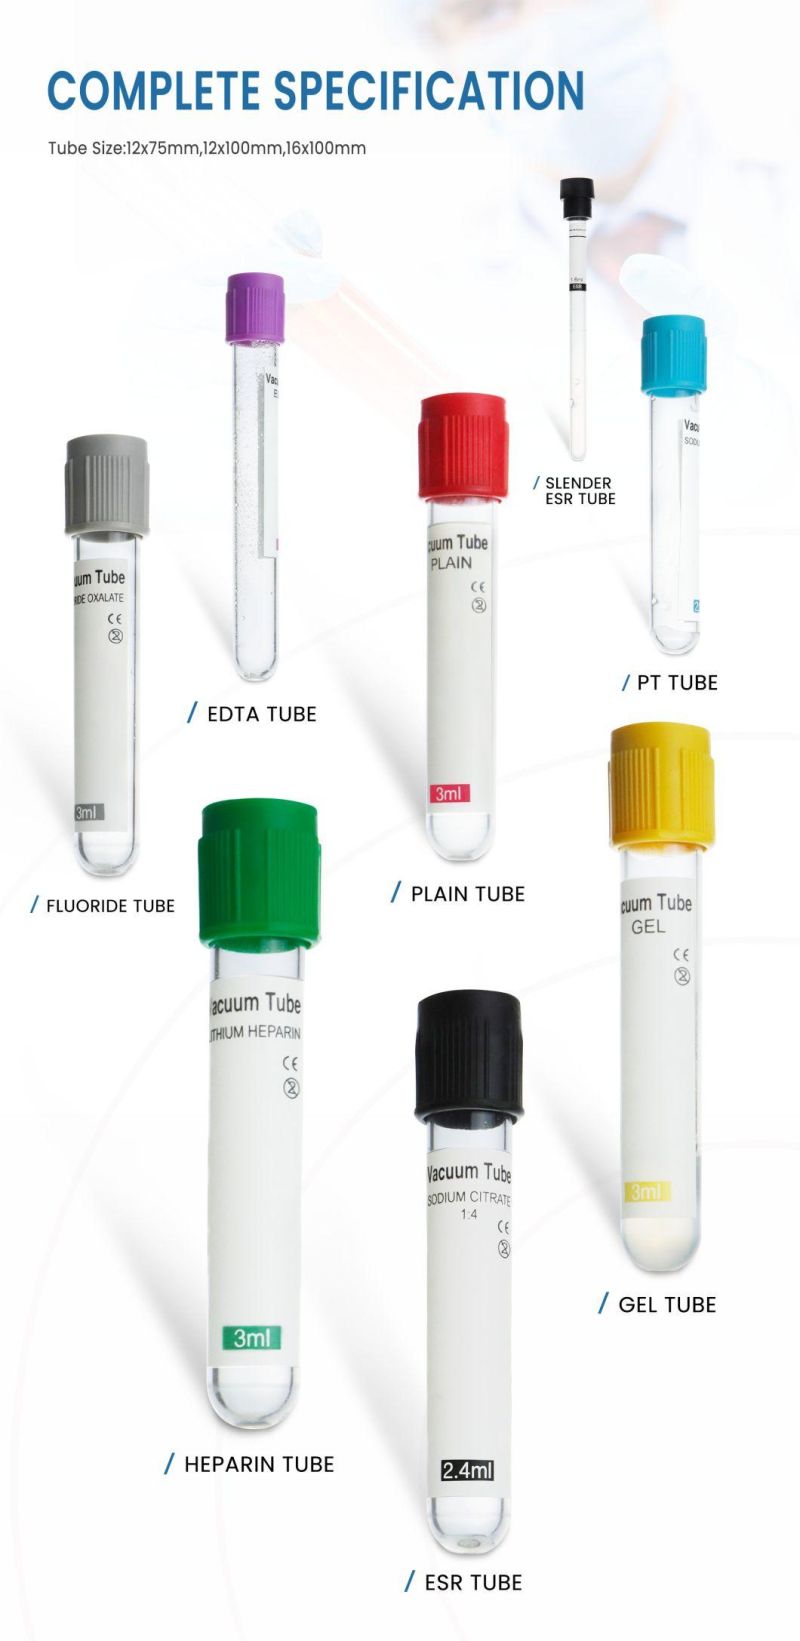 Cheap Price Medical Disposable Clot Activator Medical Micro Blood Collection Tube